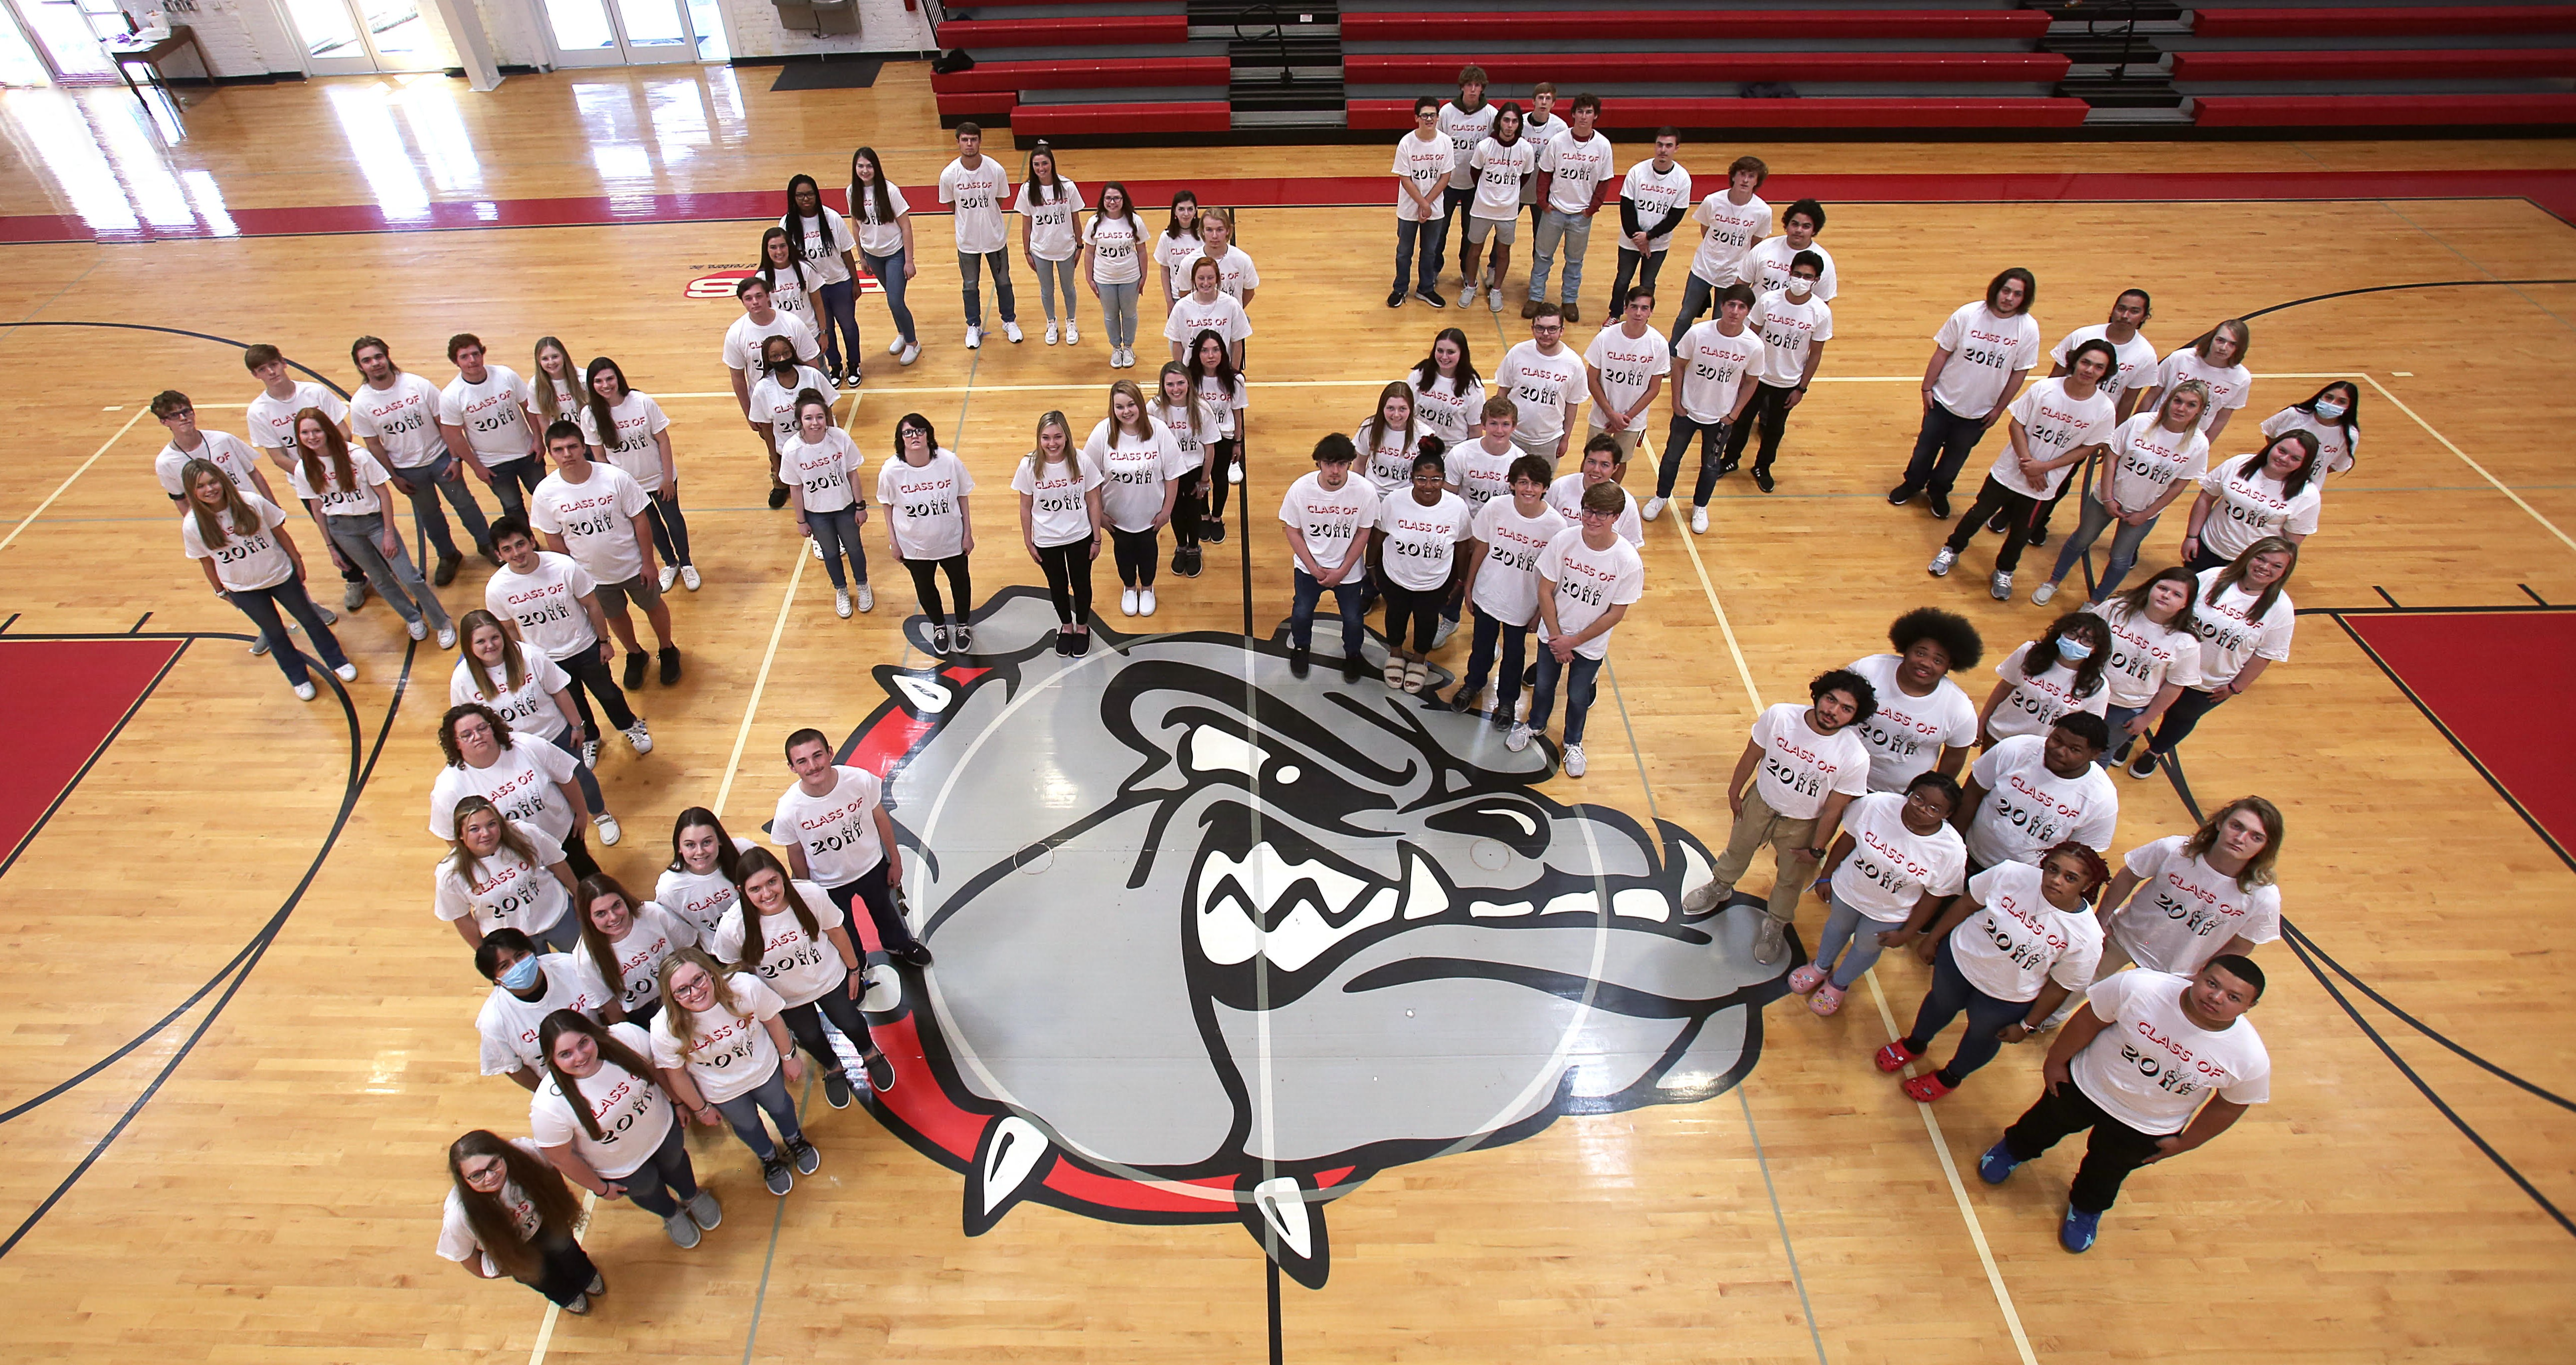 Students in the class of 2022 pose in white t-shirts and for me the number 2022